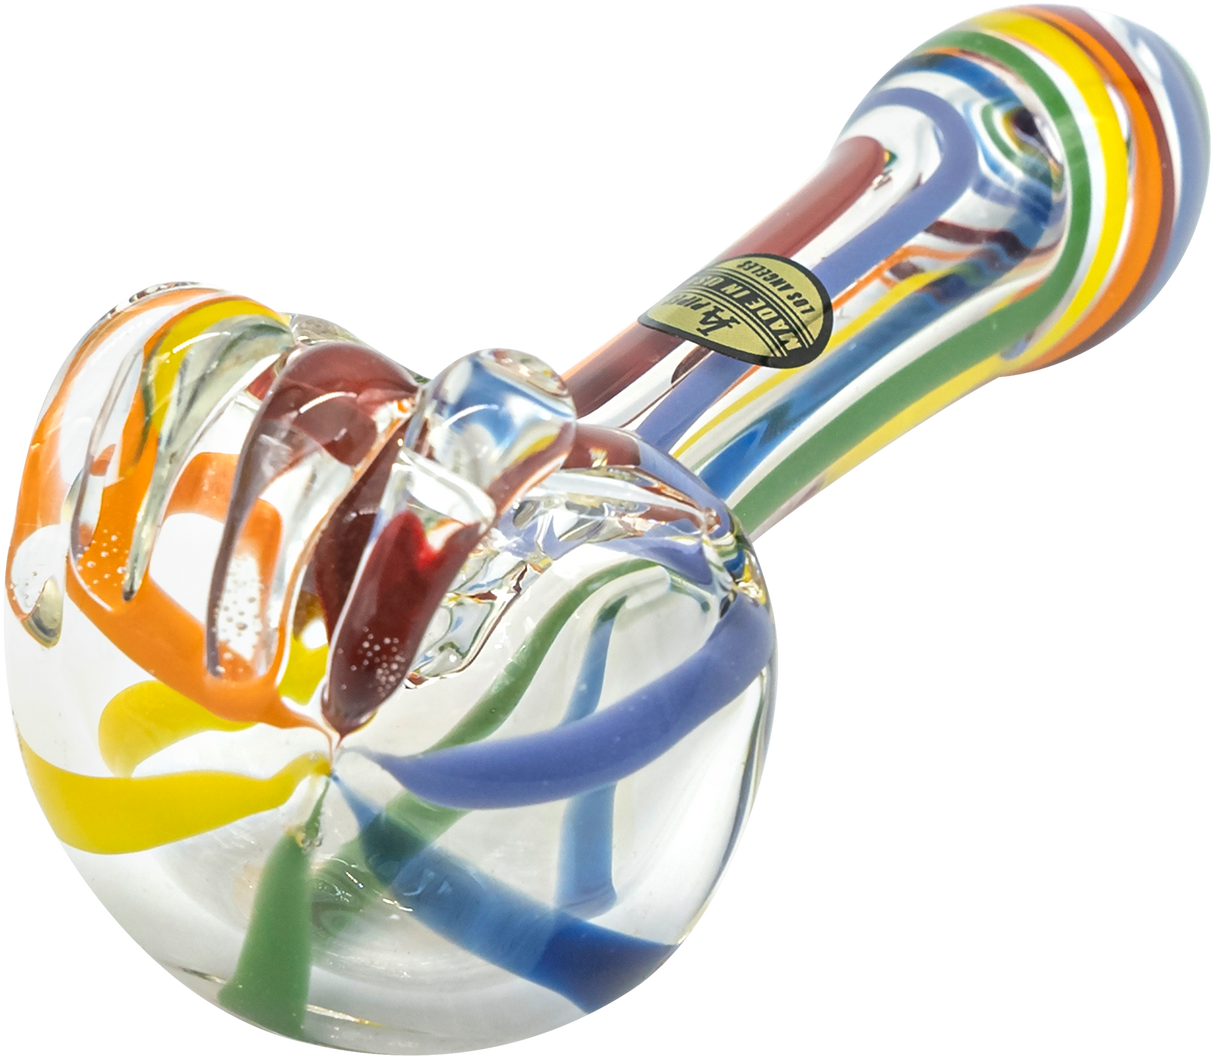 LA Pipes Rainbow Ripper Spoon Pipe, 4.35" Borosilicate Glass, Angled Side View, USA Made